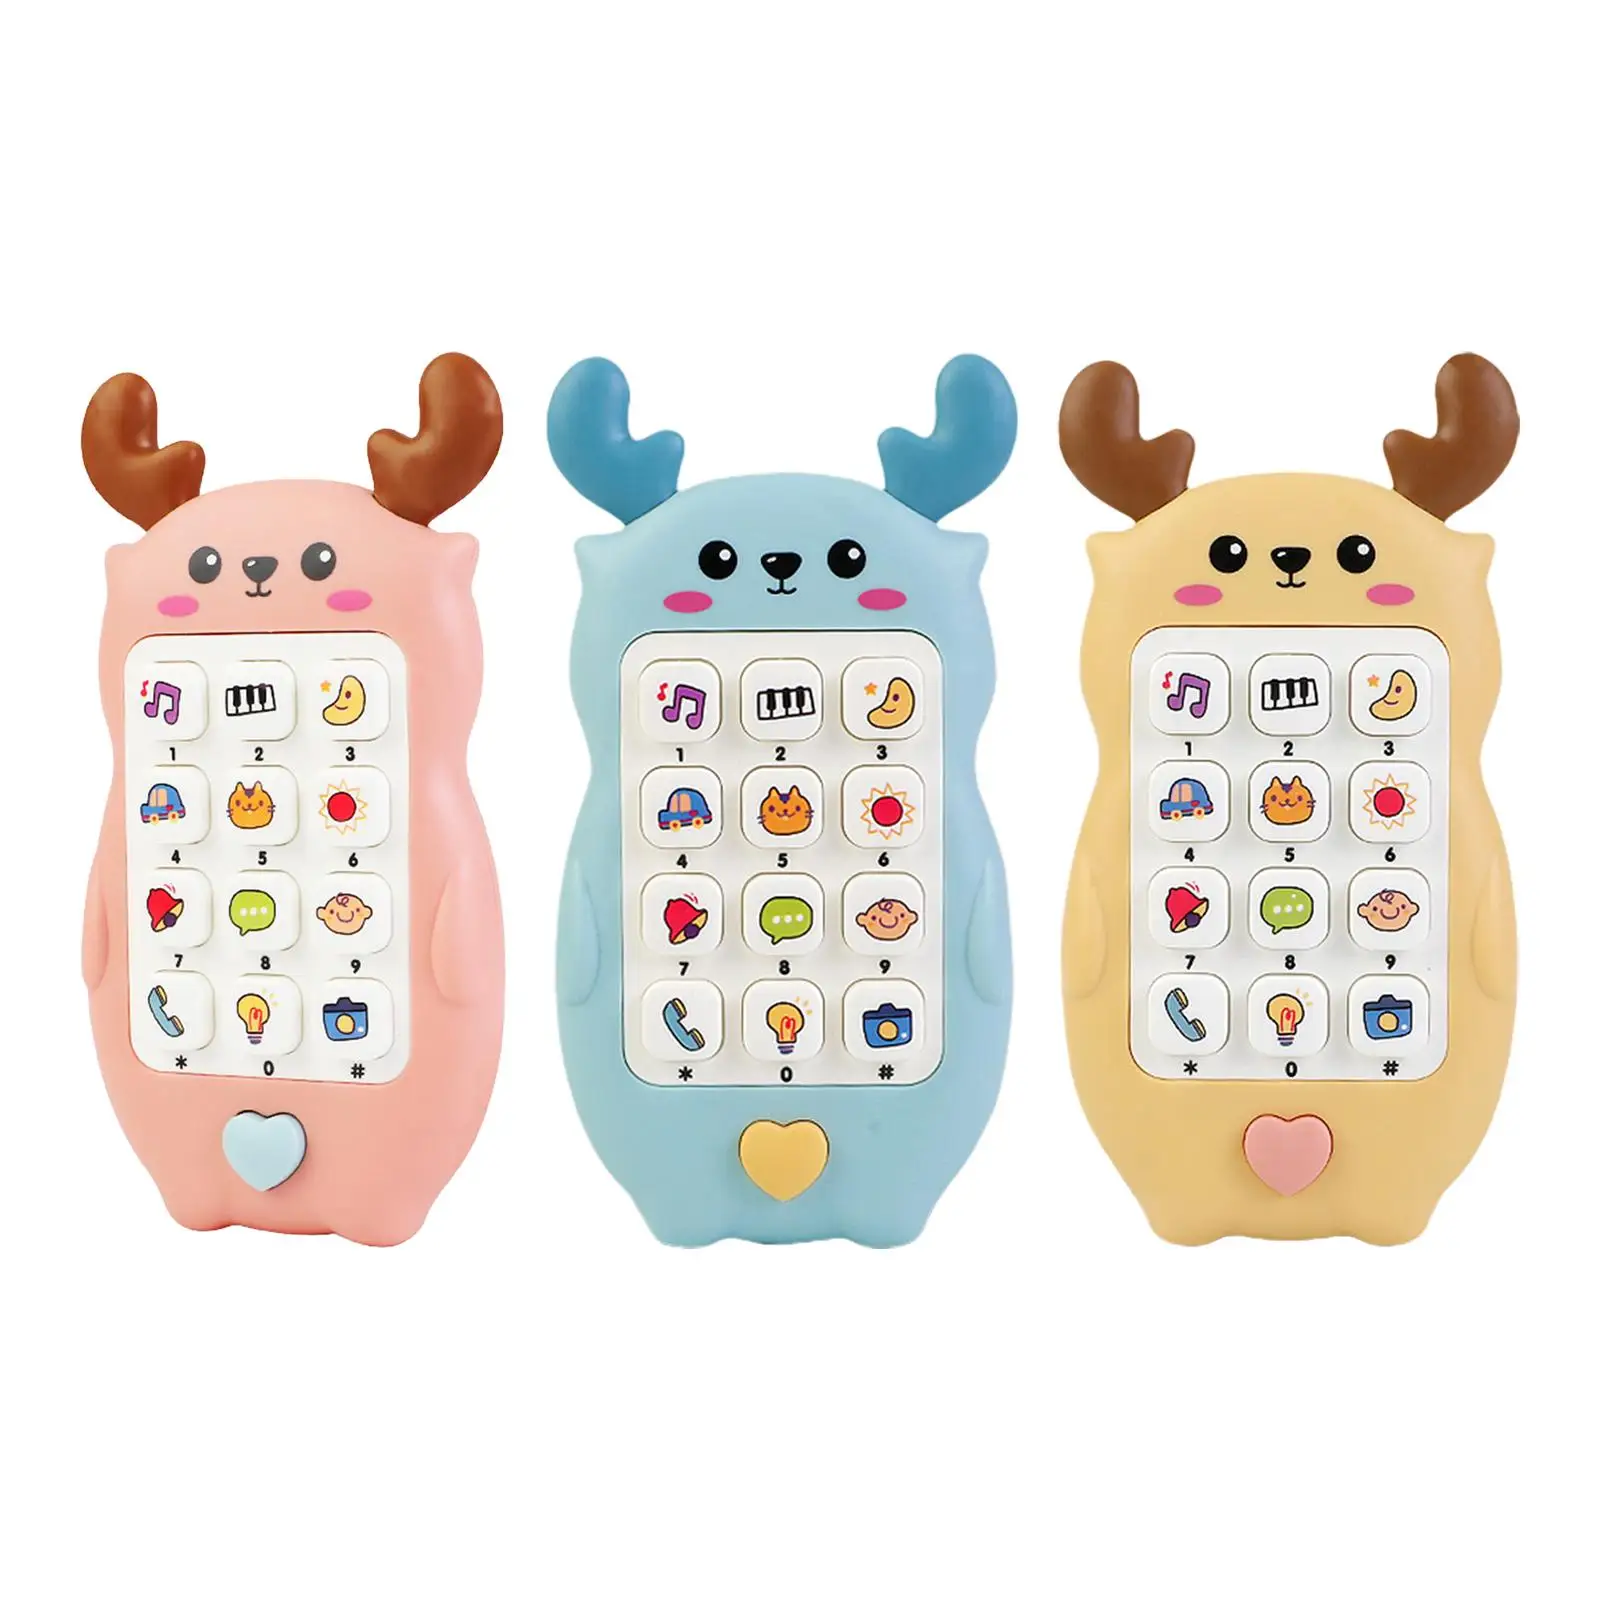 

Baby Interactive Phone Toys with Lights Fun Smartphone Toys Kid Mobile Phone Toy for Infants Baby Toddler Boys Girls 6 Months+